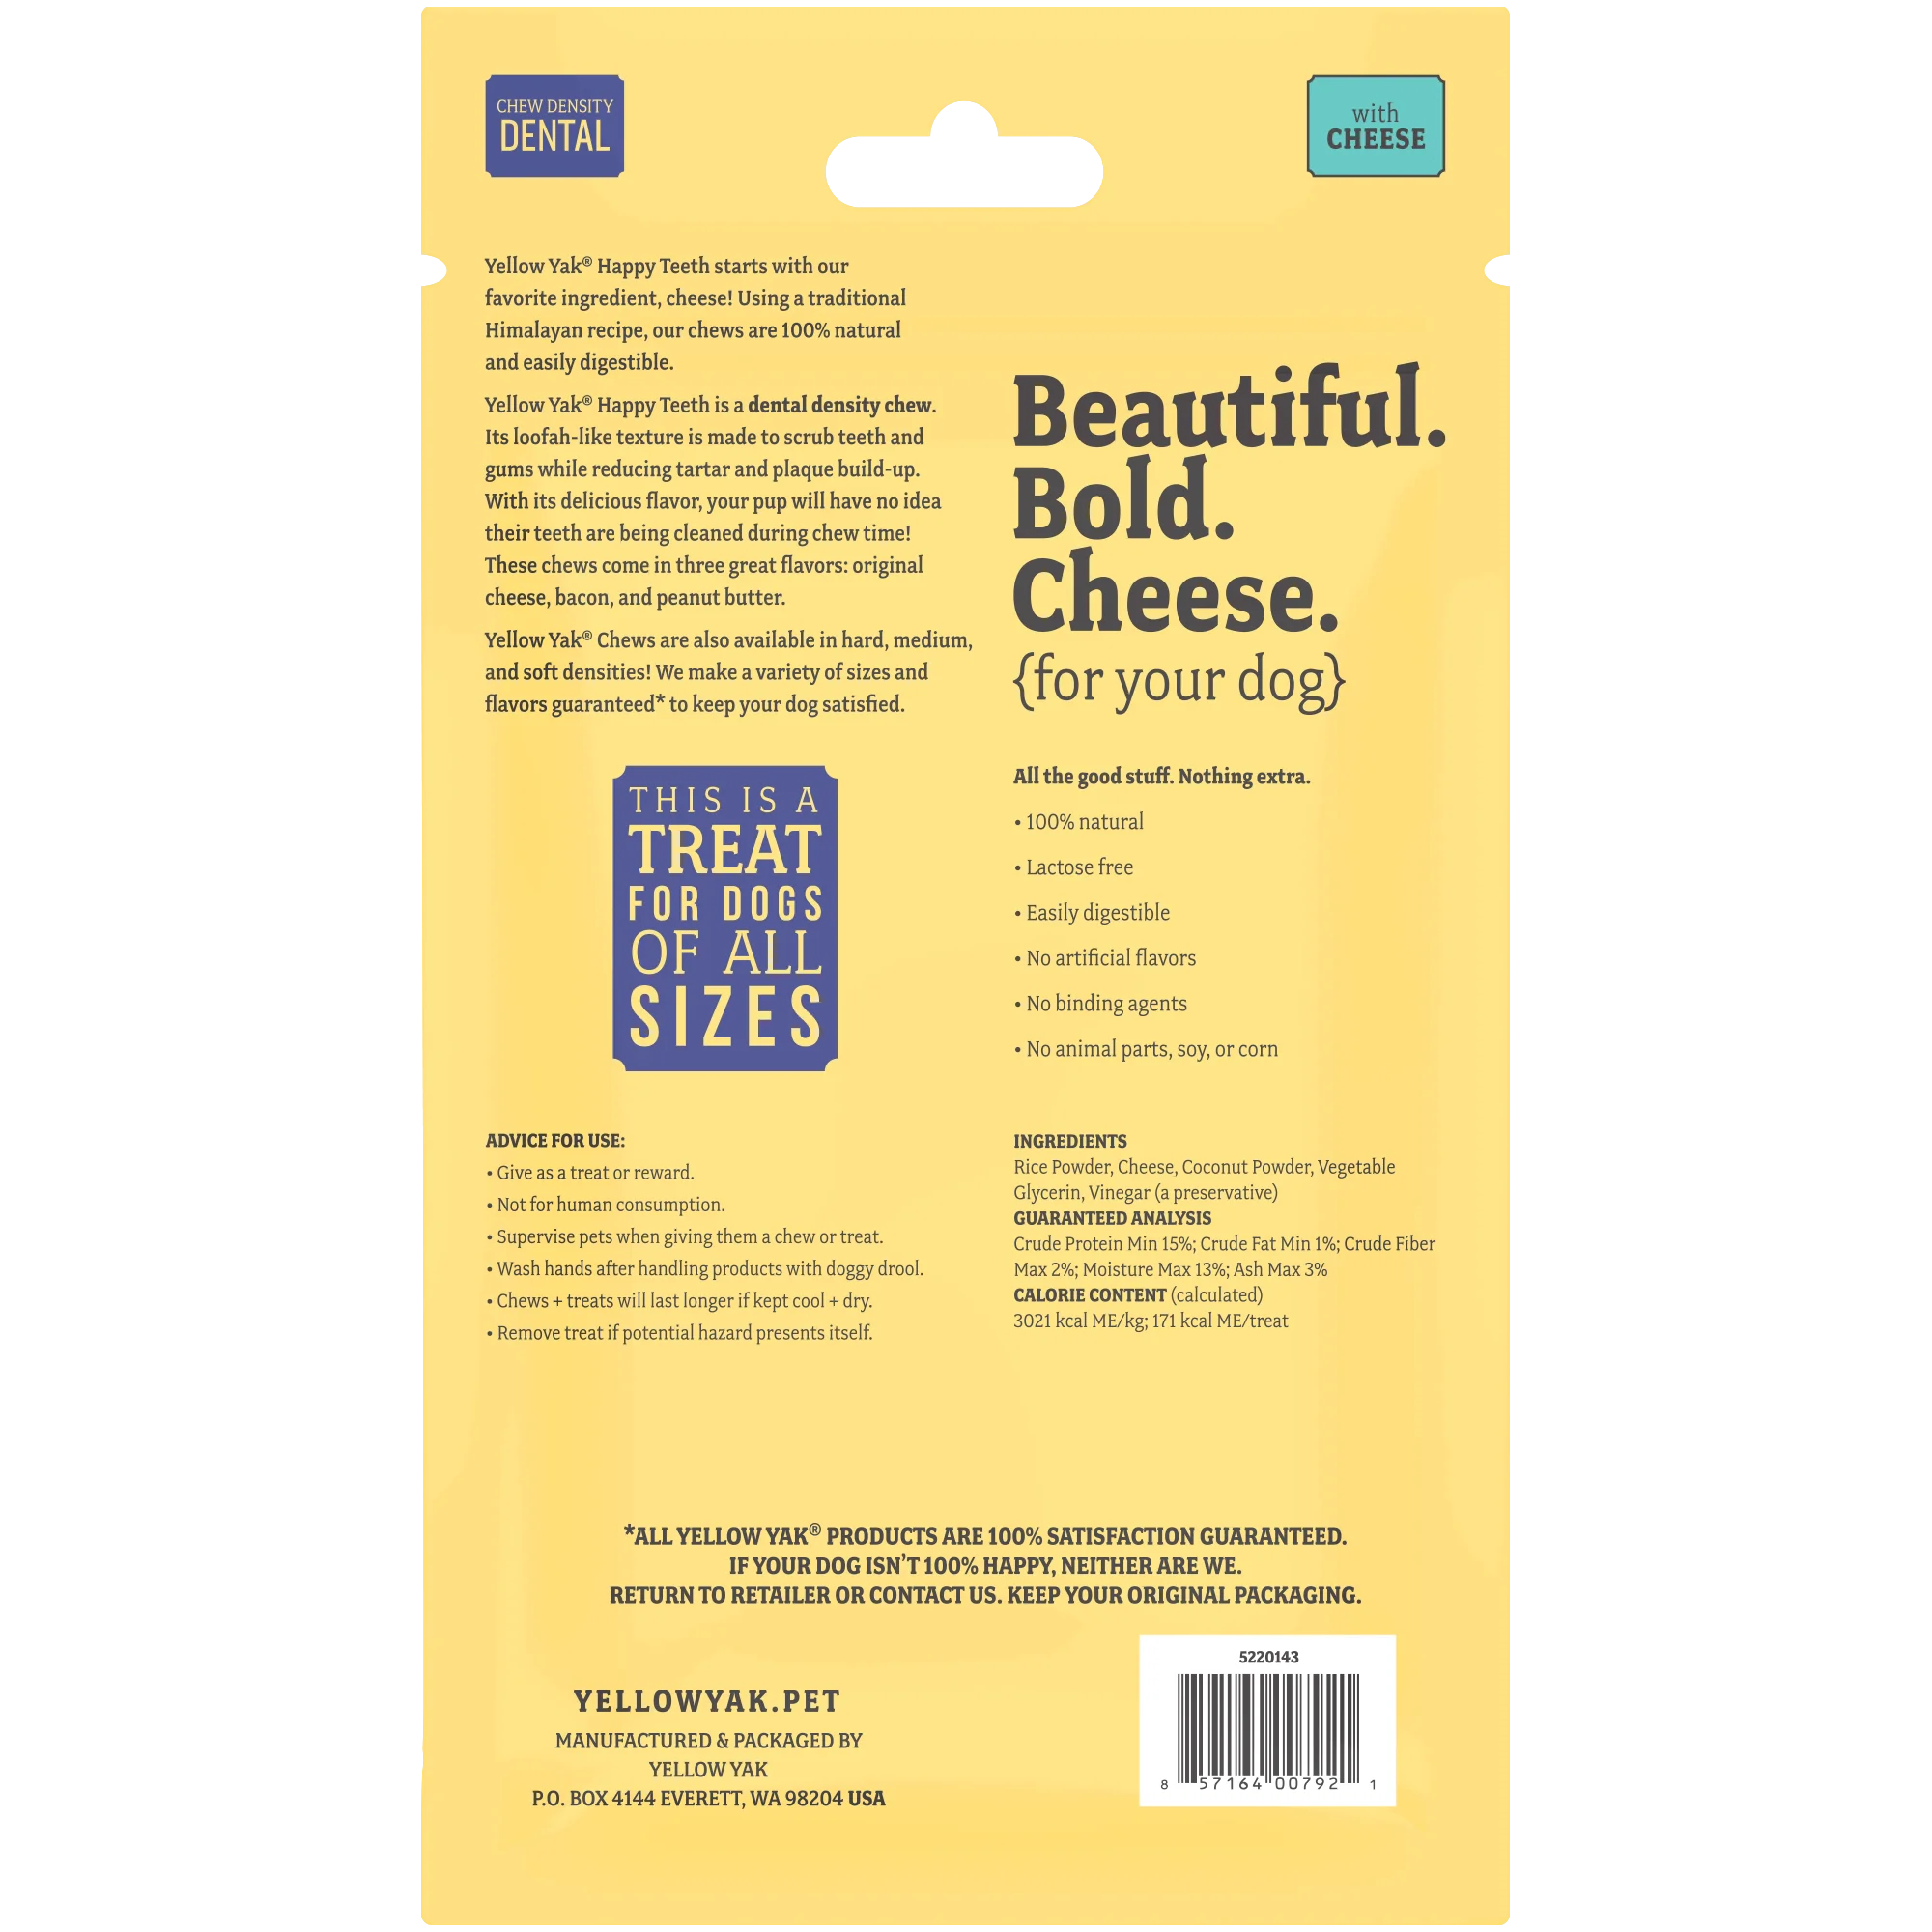 Dental chew with cheese - Back of consumer packaging